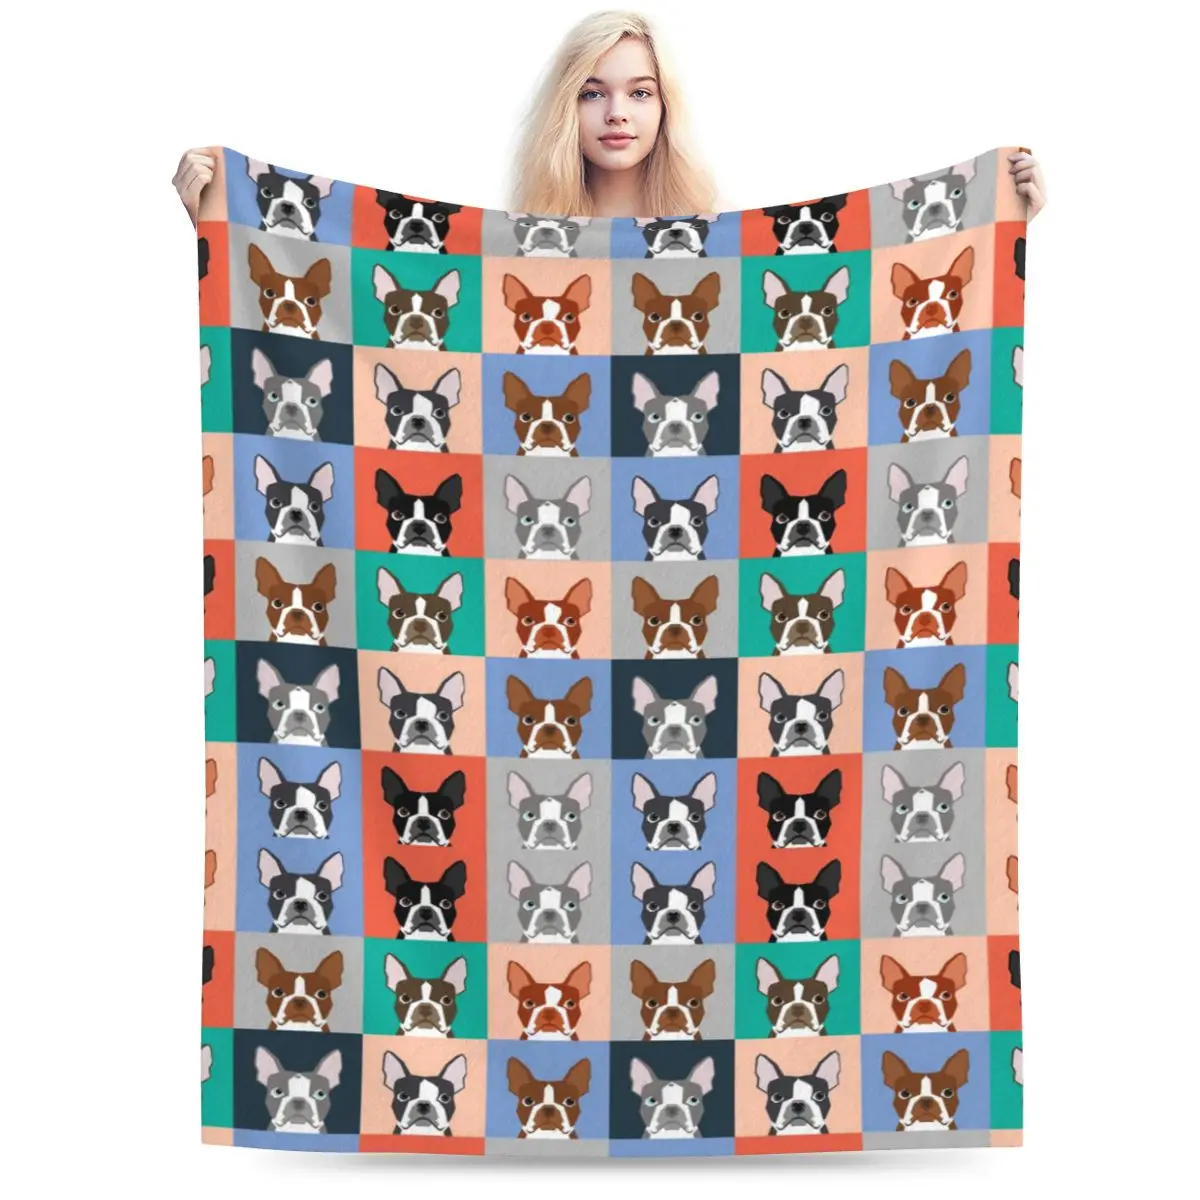 

Boston Terrier Dog Cartoon Soft Flannel Throw Blanket for Couch Bed Sofa Cover Blanket Warm Blankets Travel Blanket